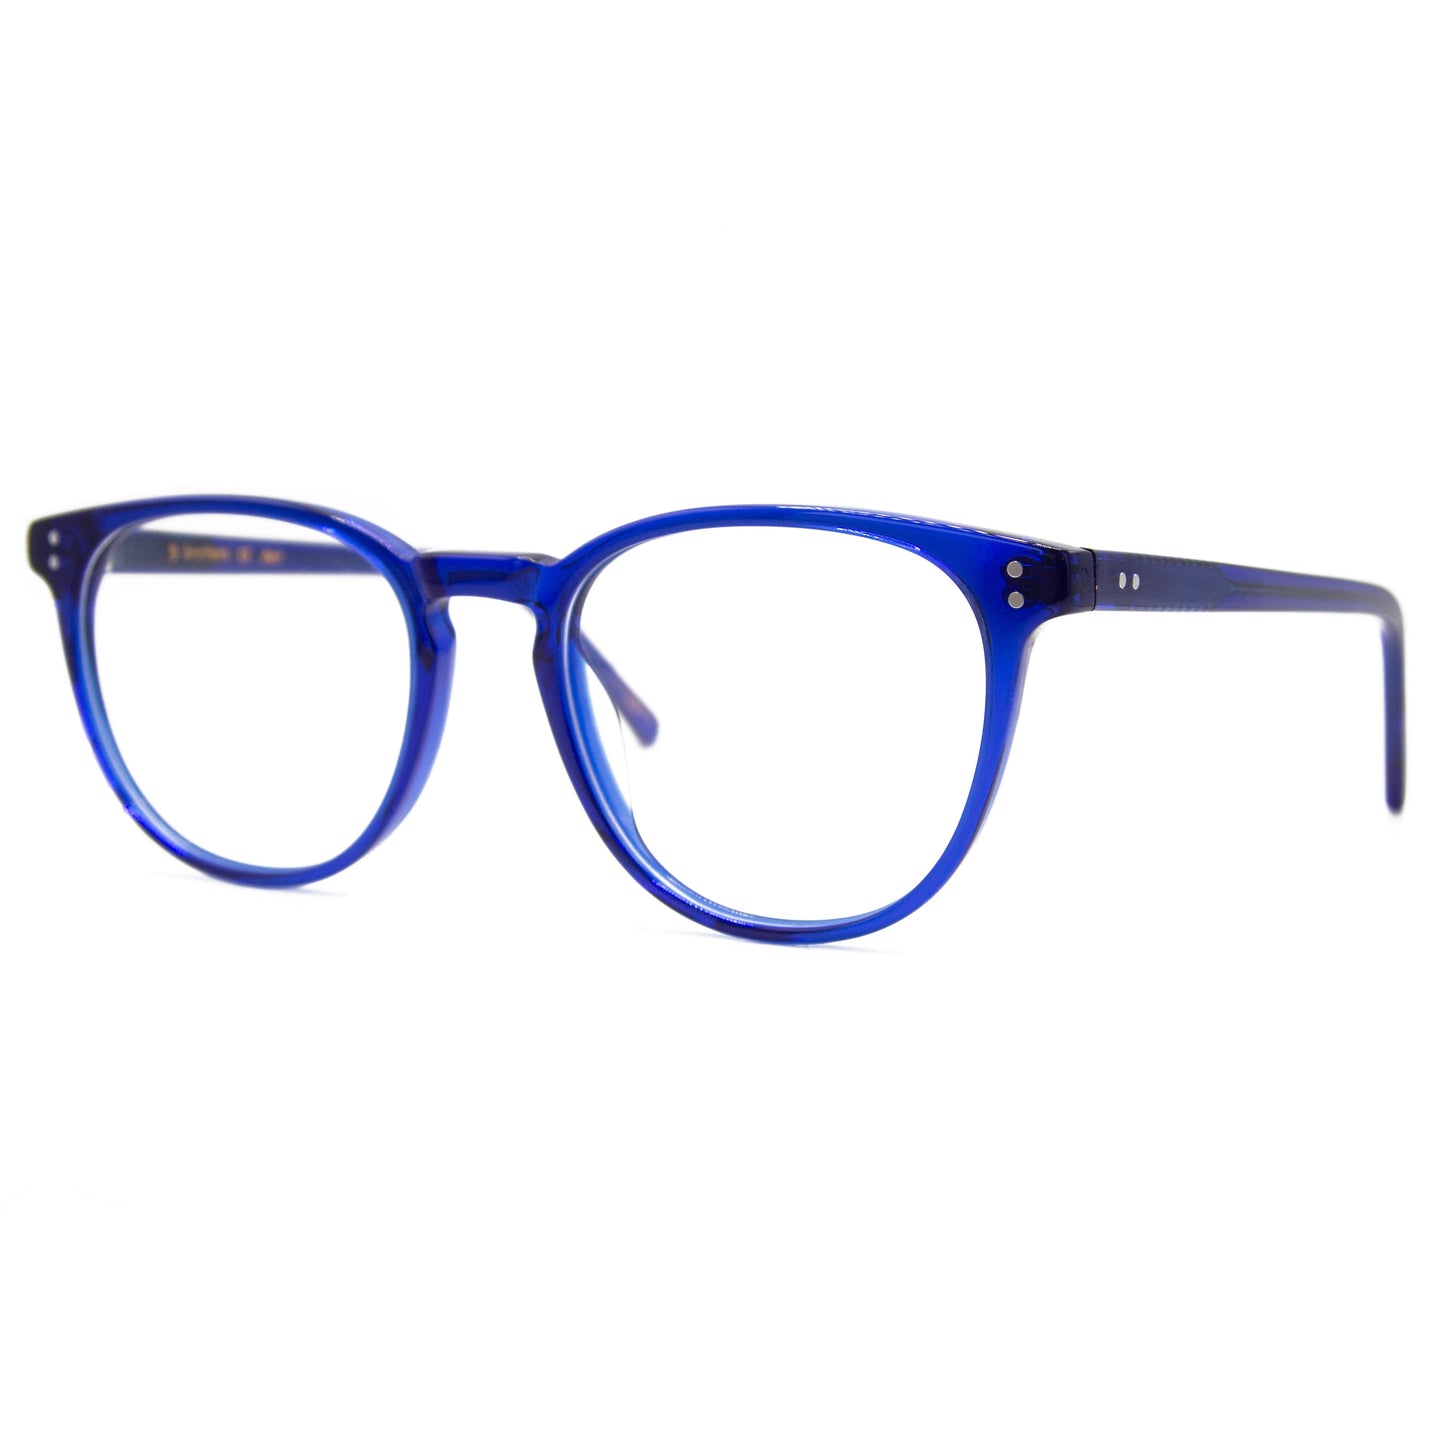 3 brothers - Ant - Navy - Prescription Glasses - Side